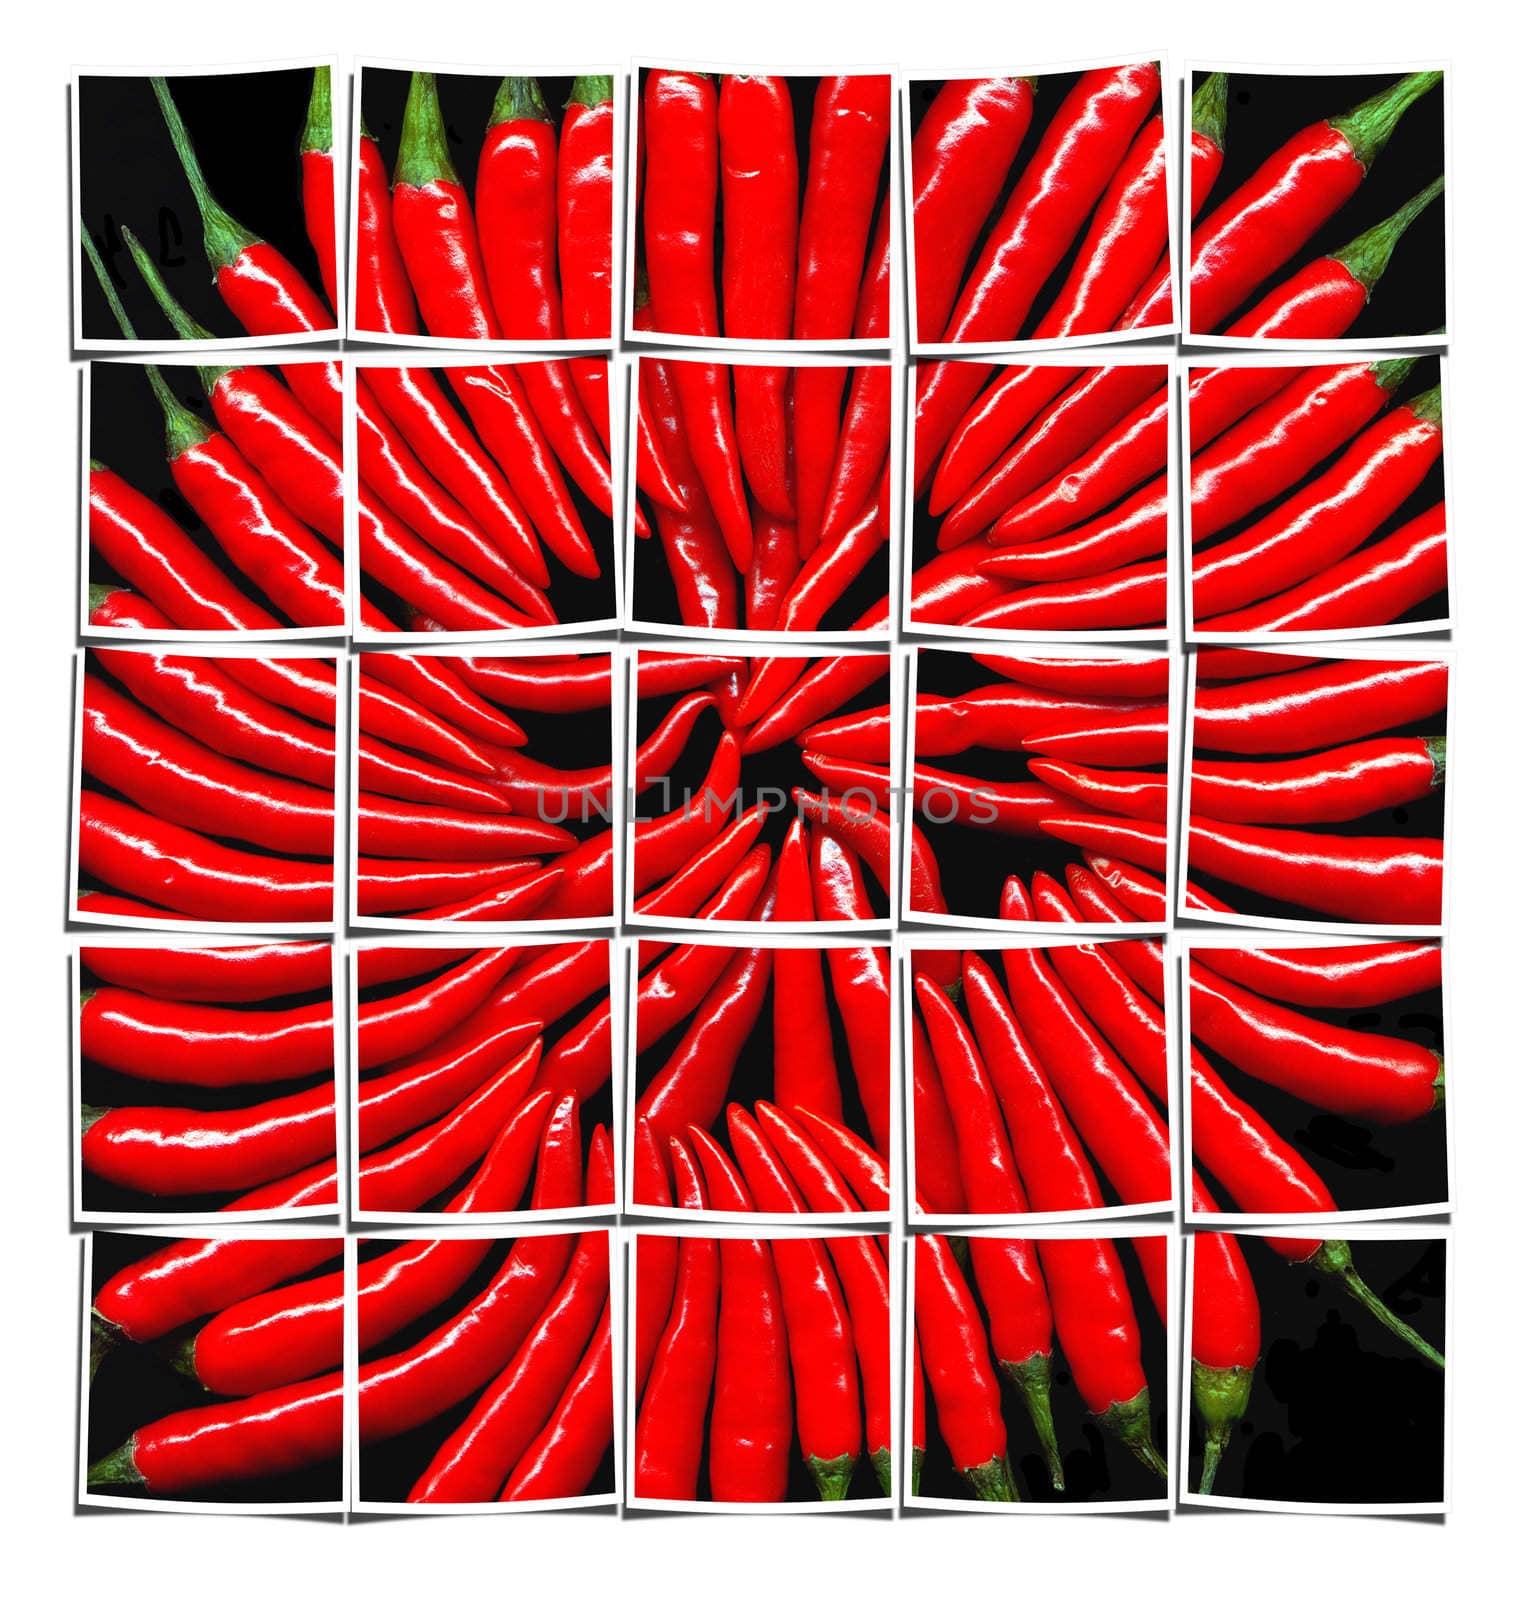 red chili peppers on black background collage composition of multiple images over white